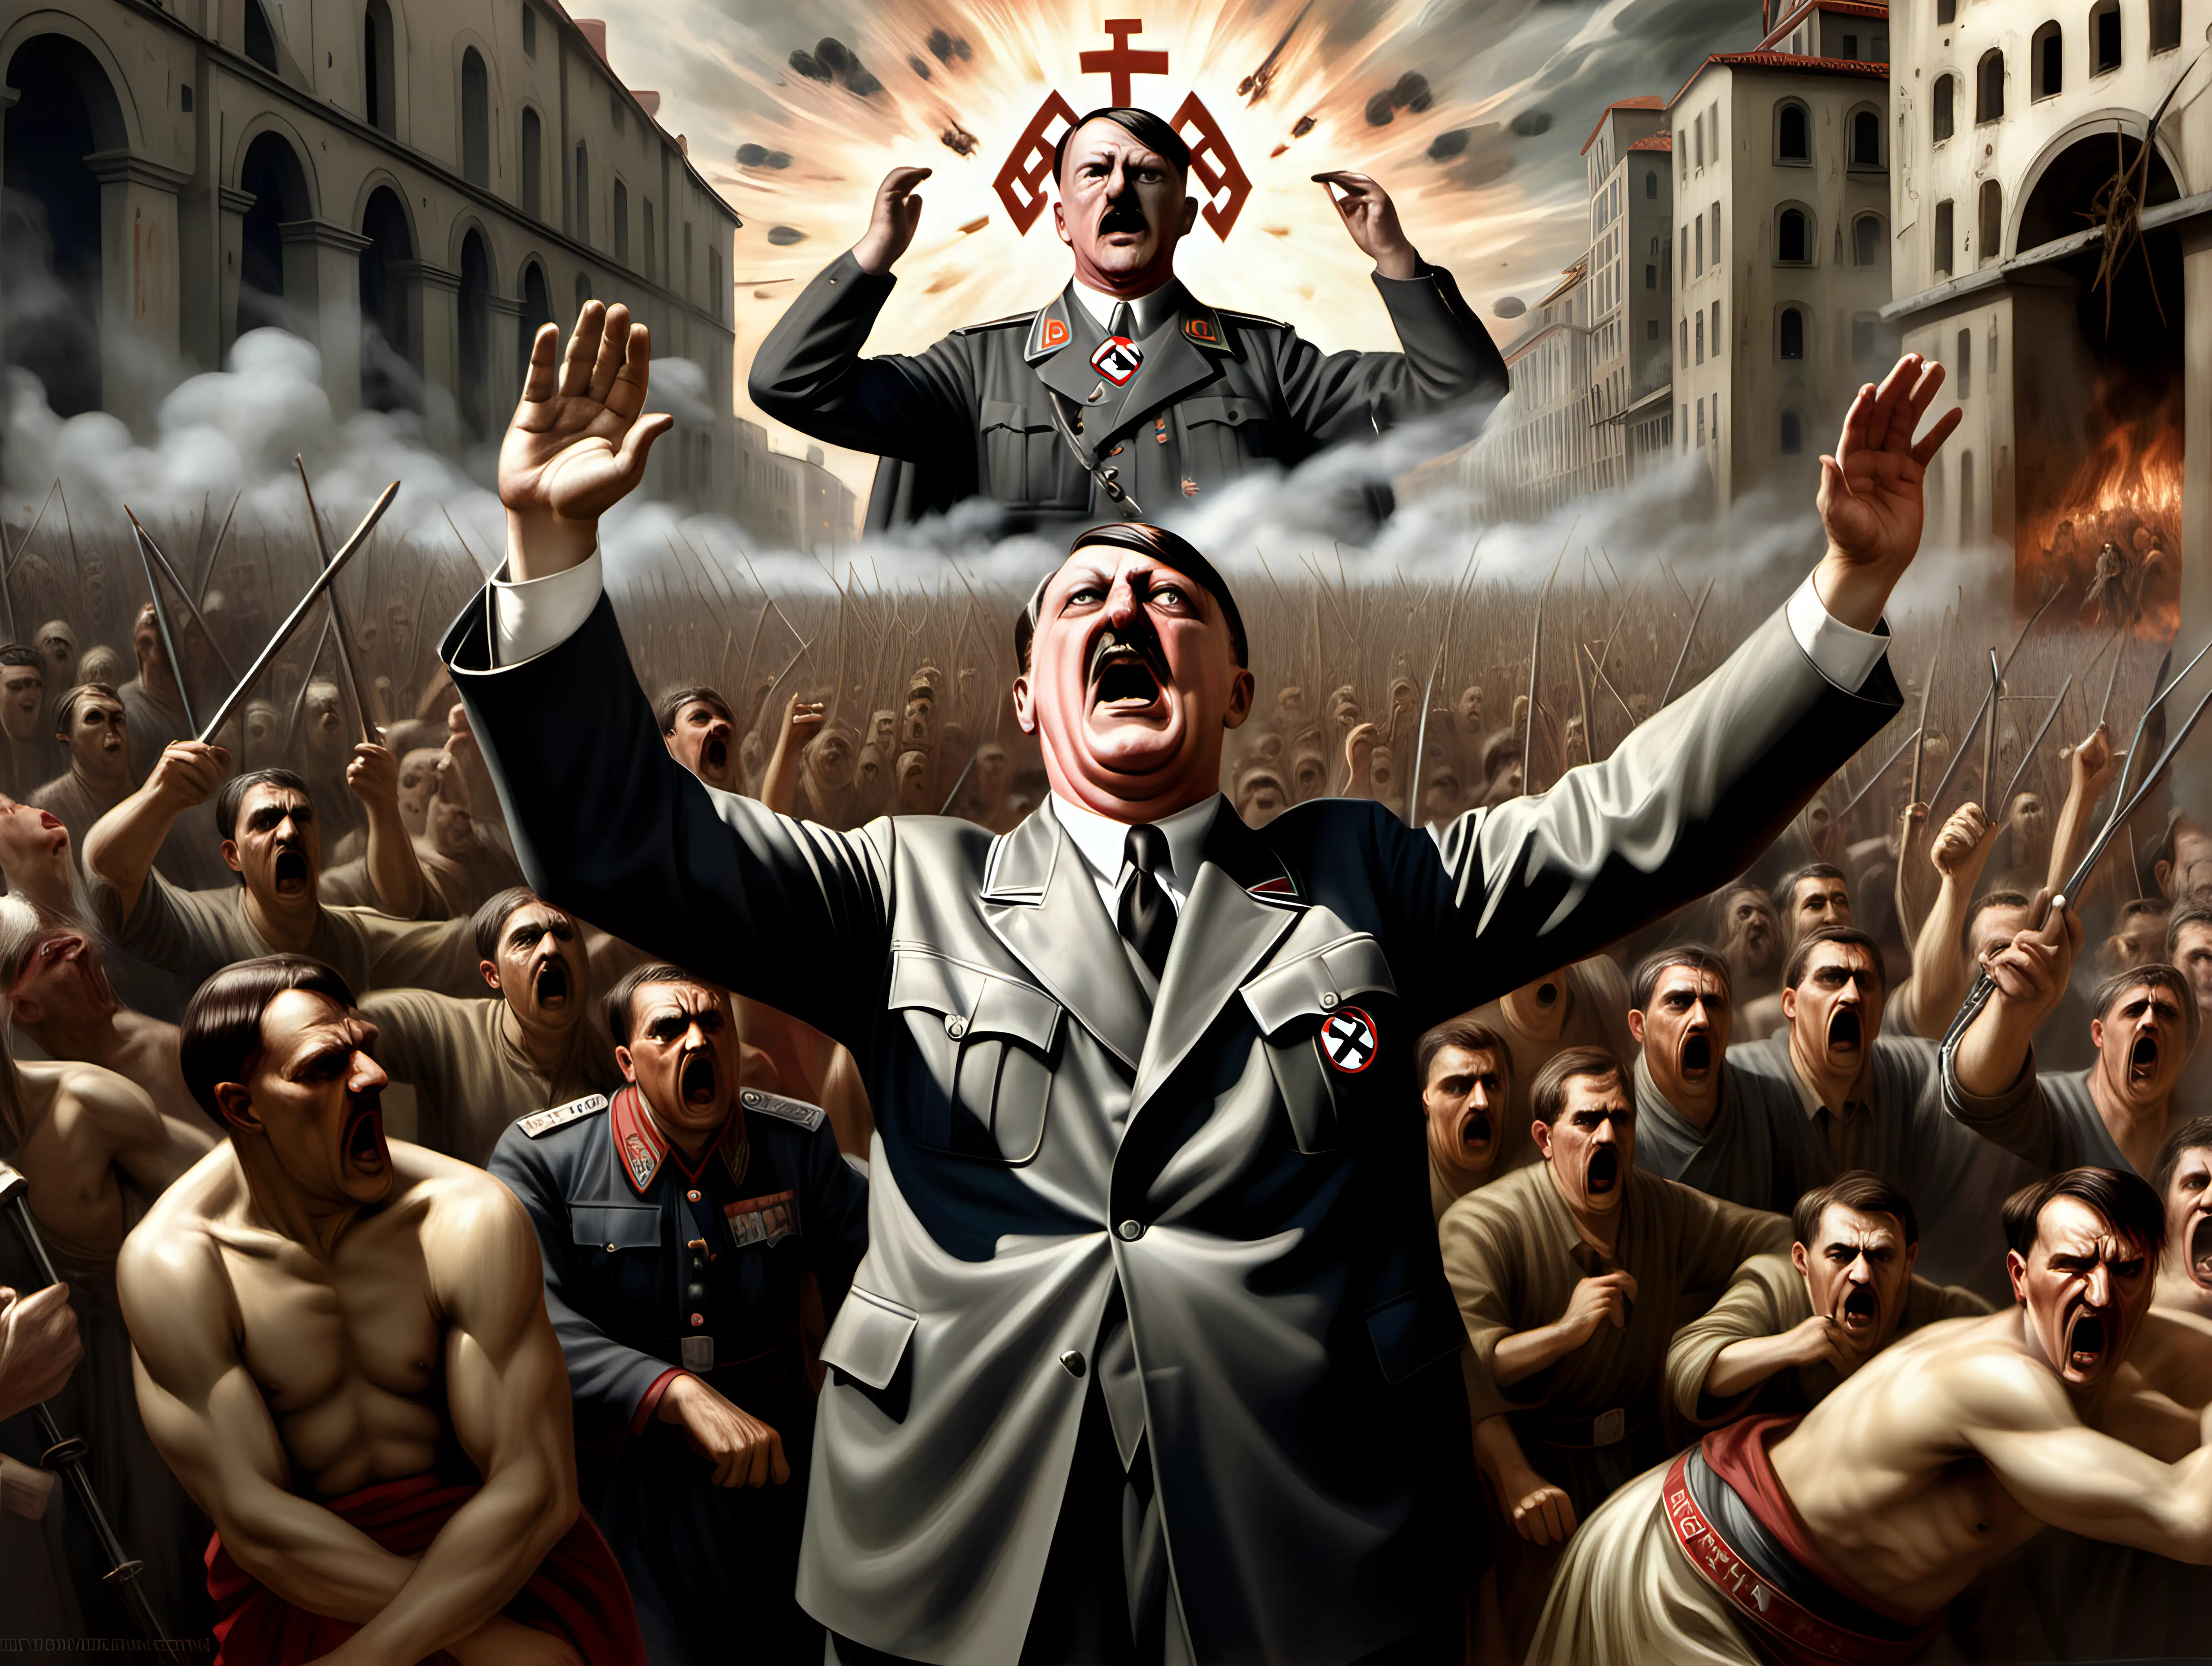 hitler tormanting  a urban chaotic world with his orders Byzantine iconography